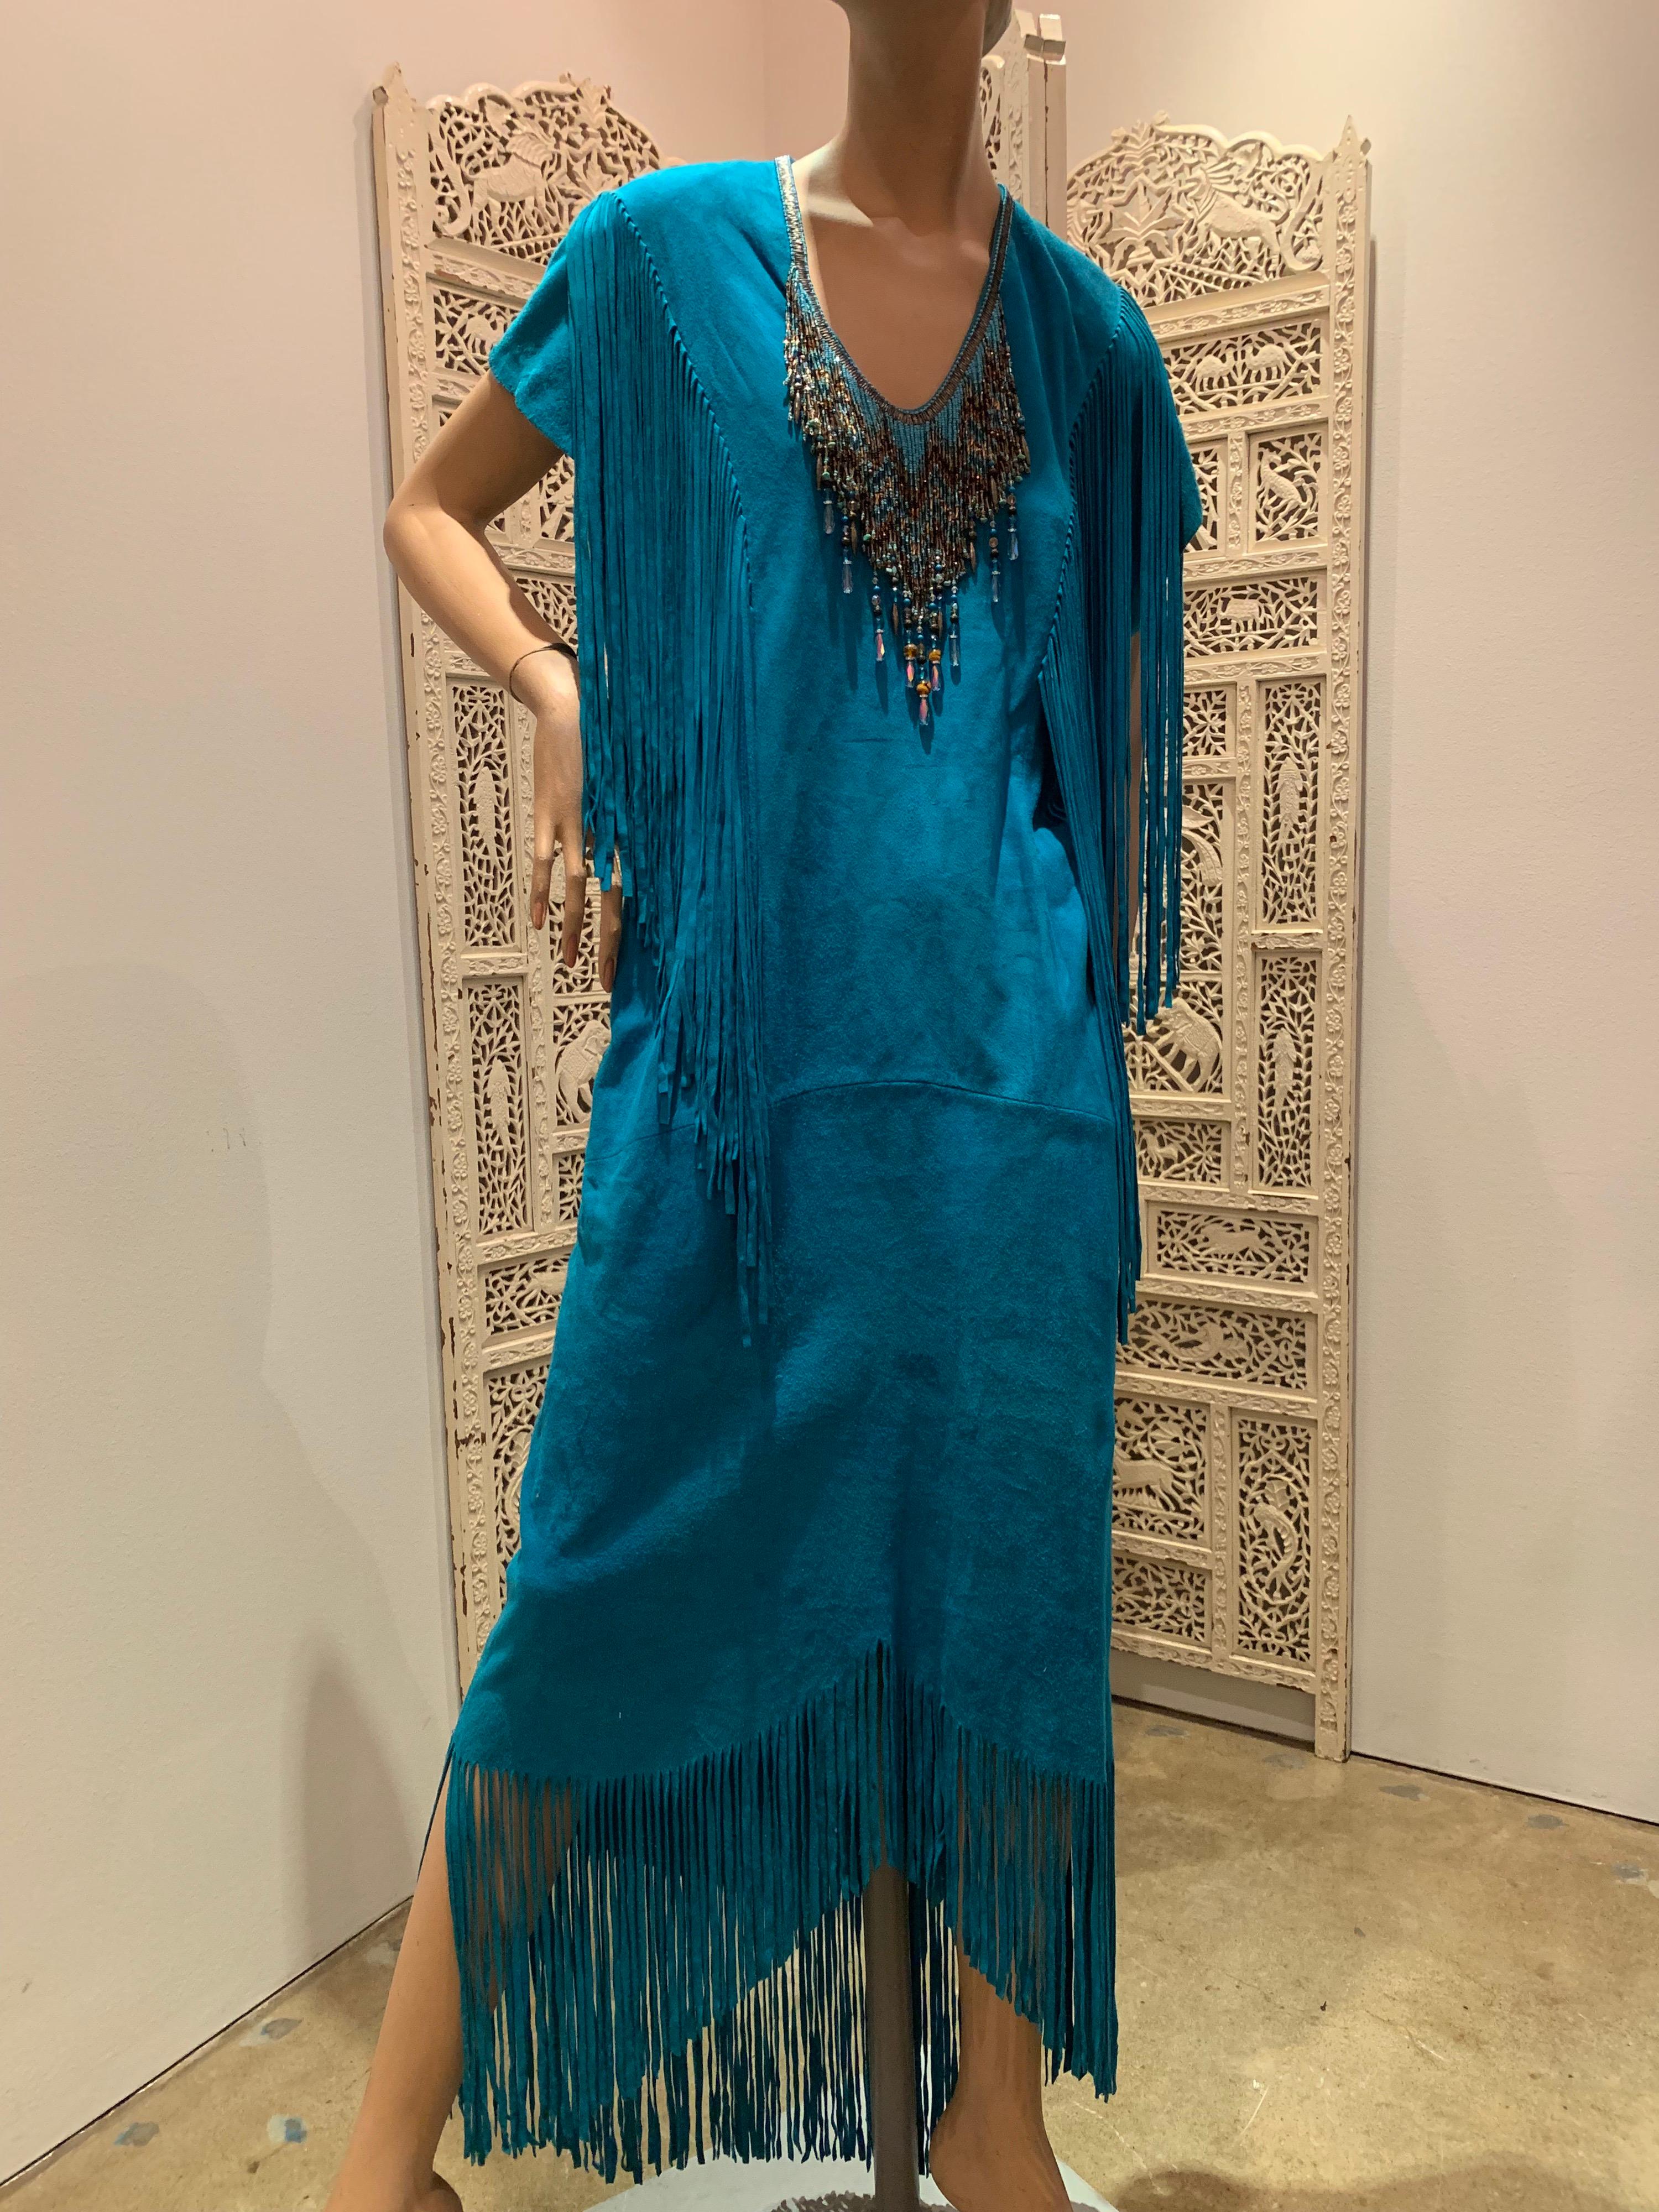 Women's 1970s Chic Skins Turquoise Suede Caftan W/ Suede & Heavy Beadwork Fringe 